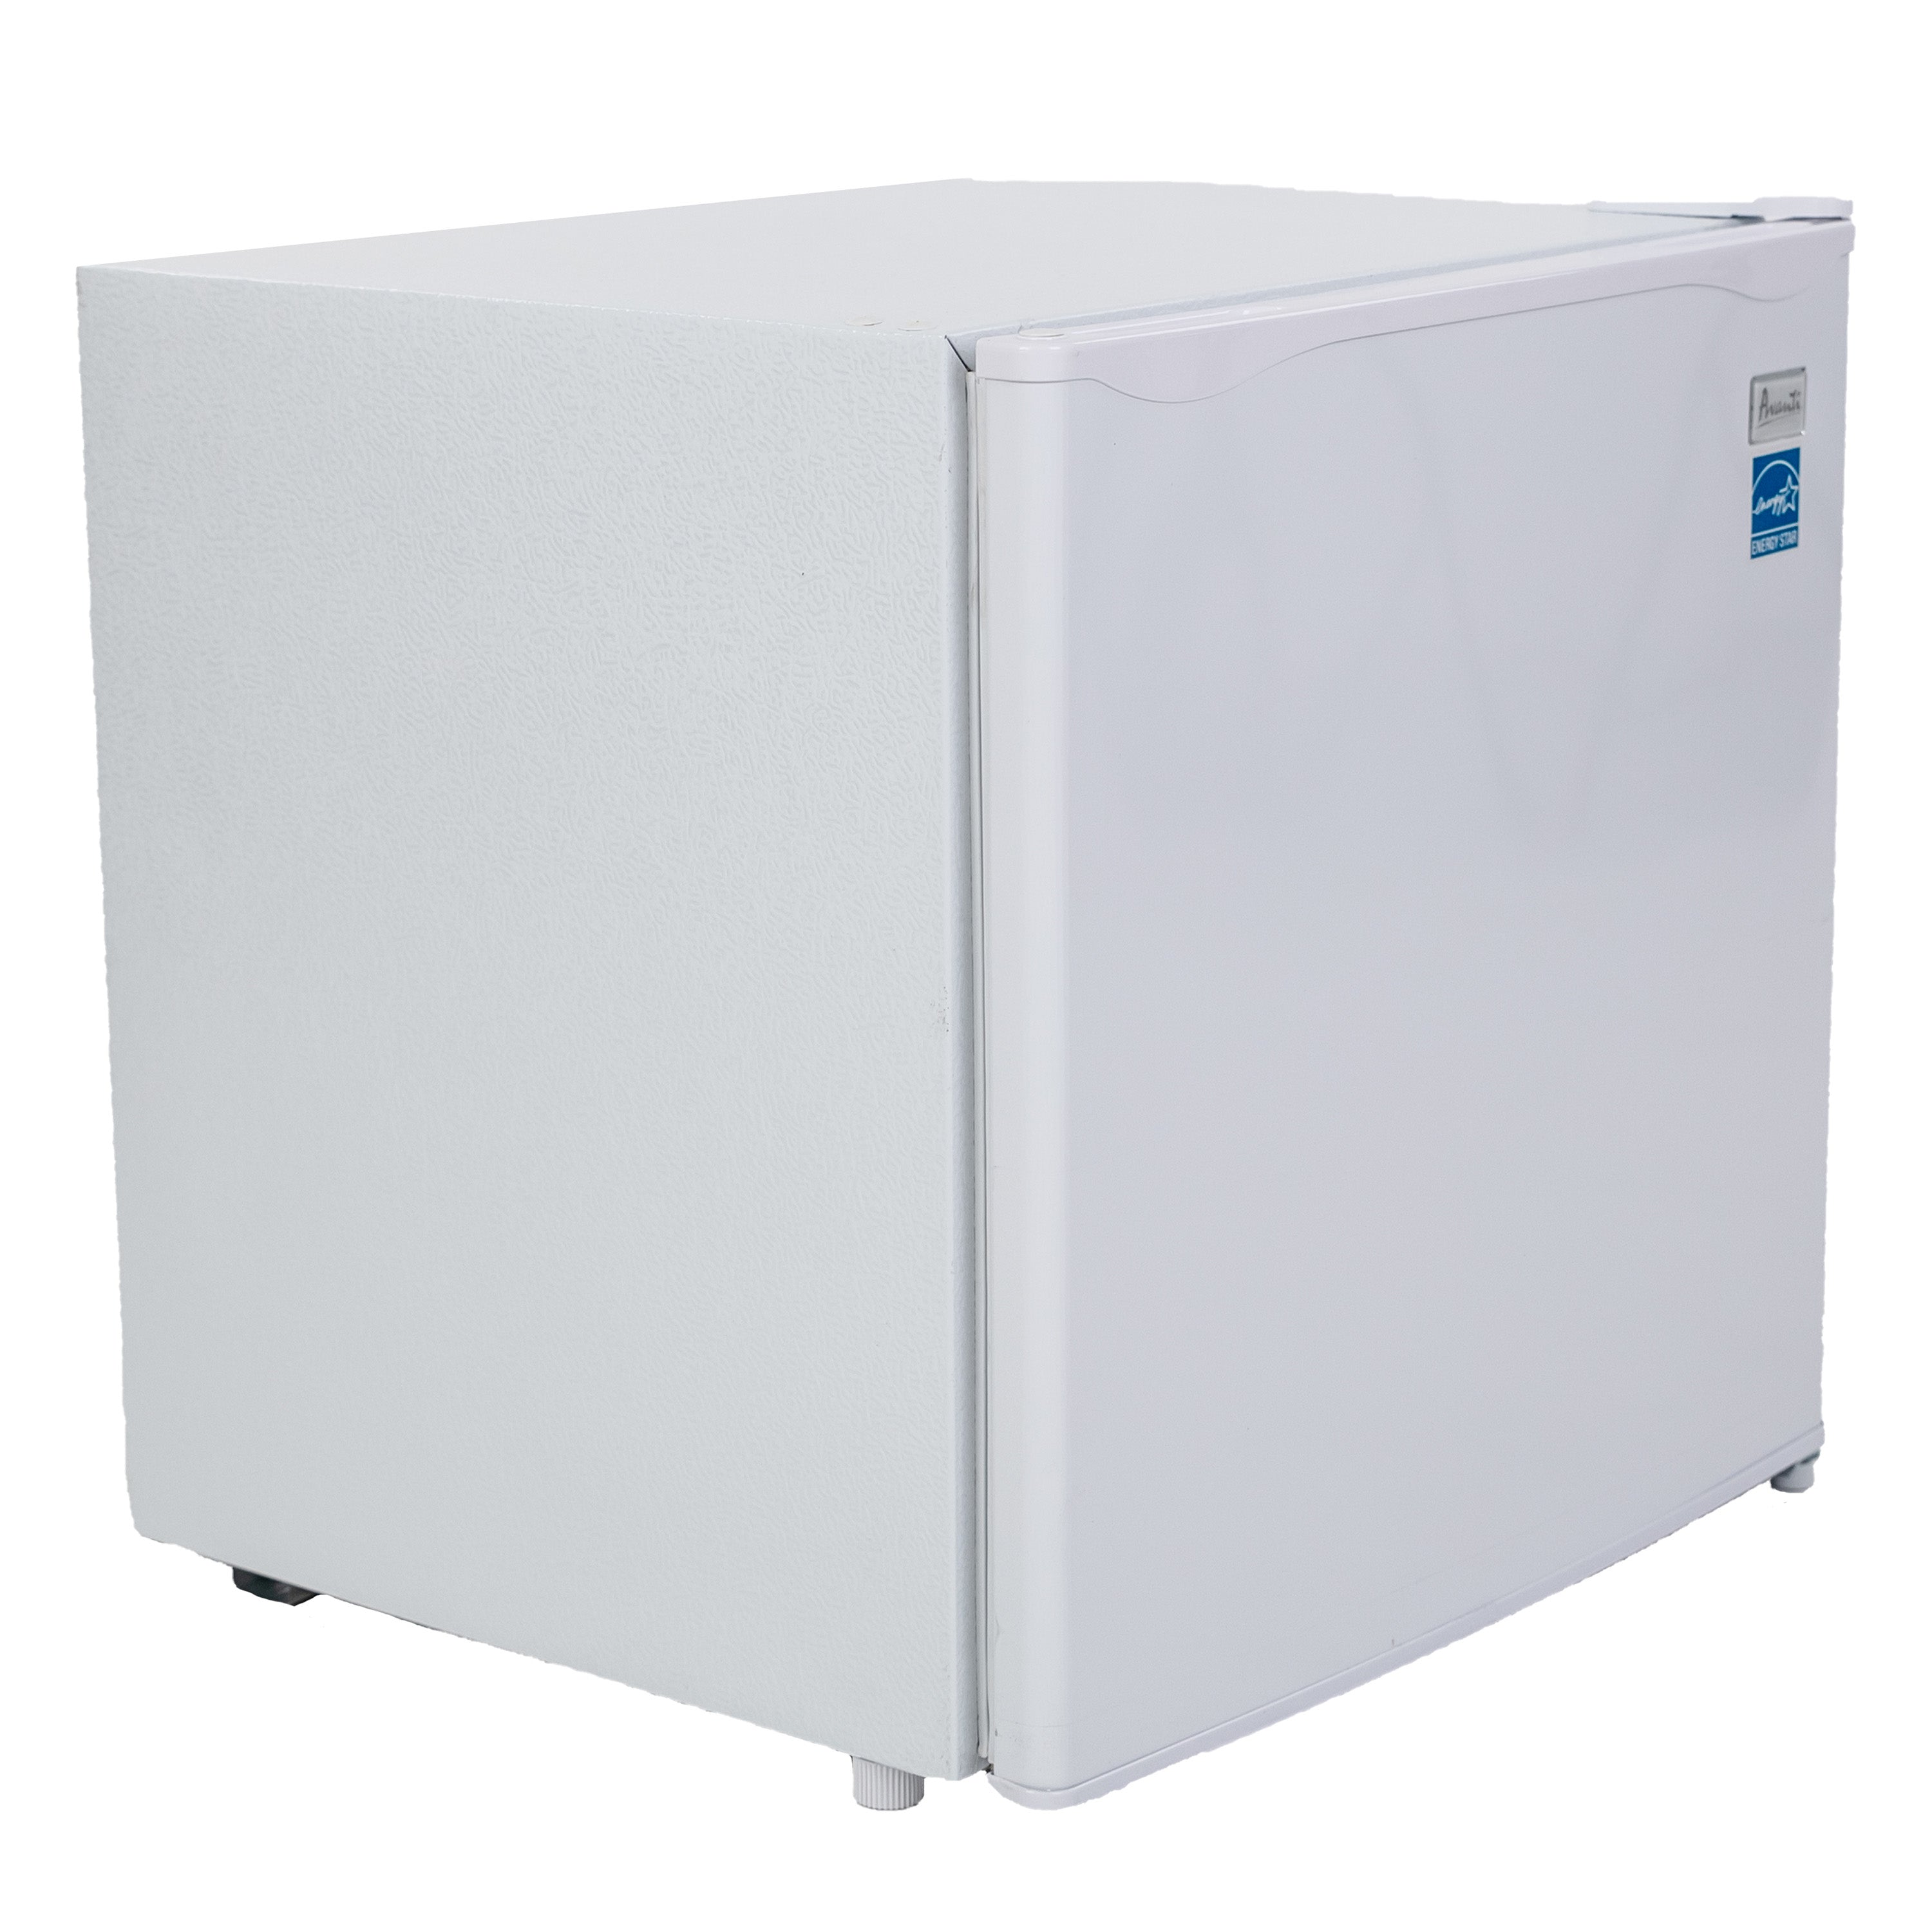 1.6 Cu. Ft. Capacity ENERGY STAR® Qualified Compact Refrigerator, White